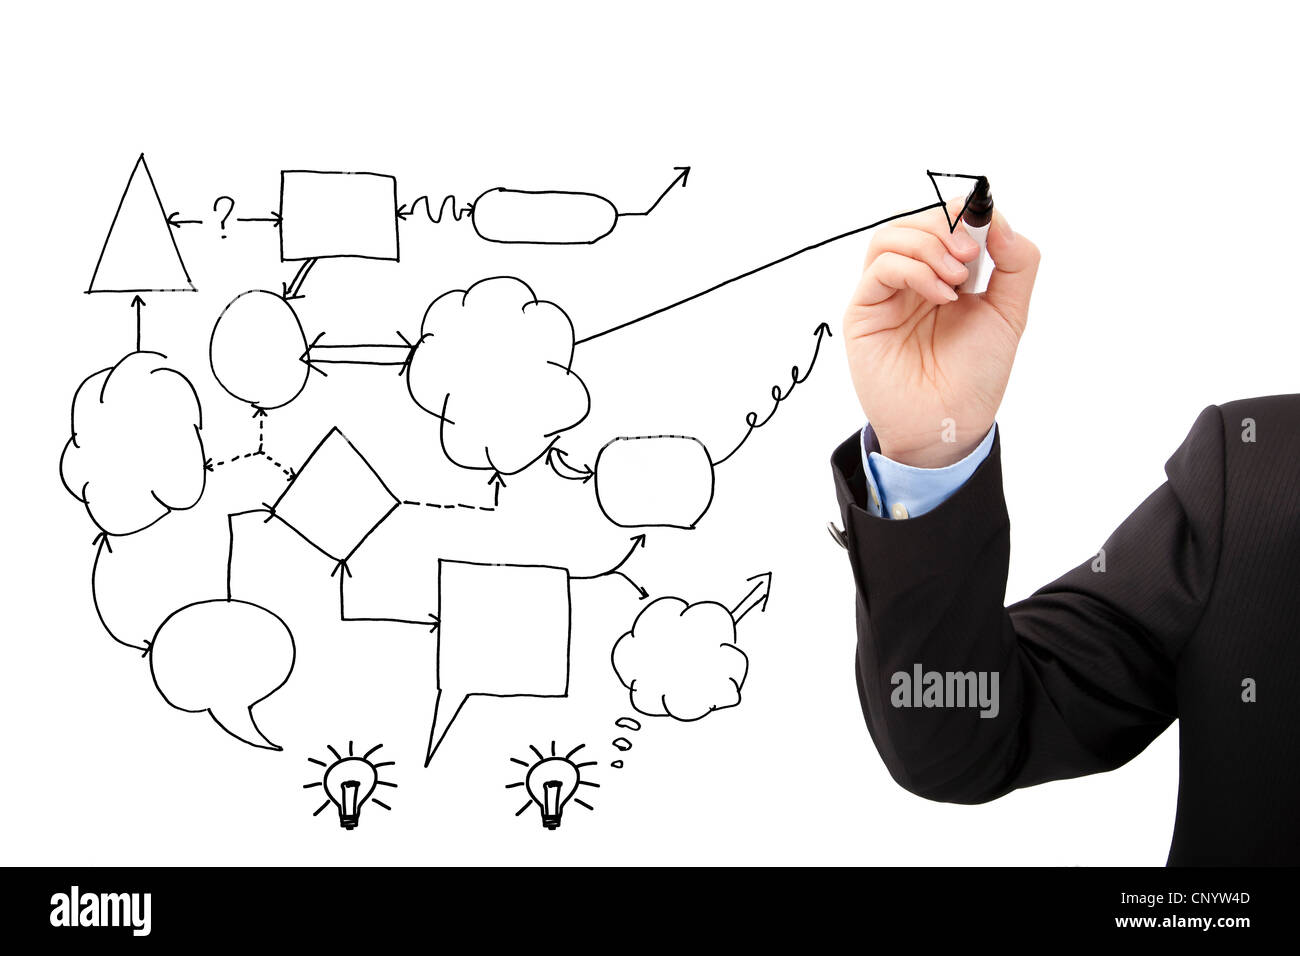 Businessman's hand draw idea and analysis concept diagram Stock Photo